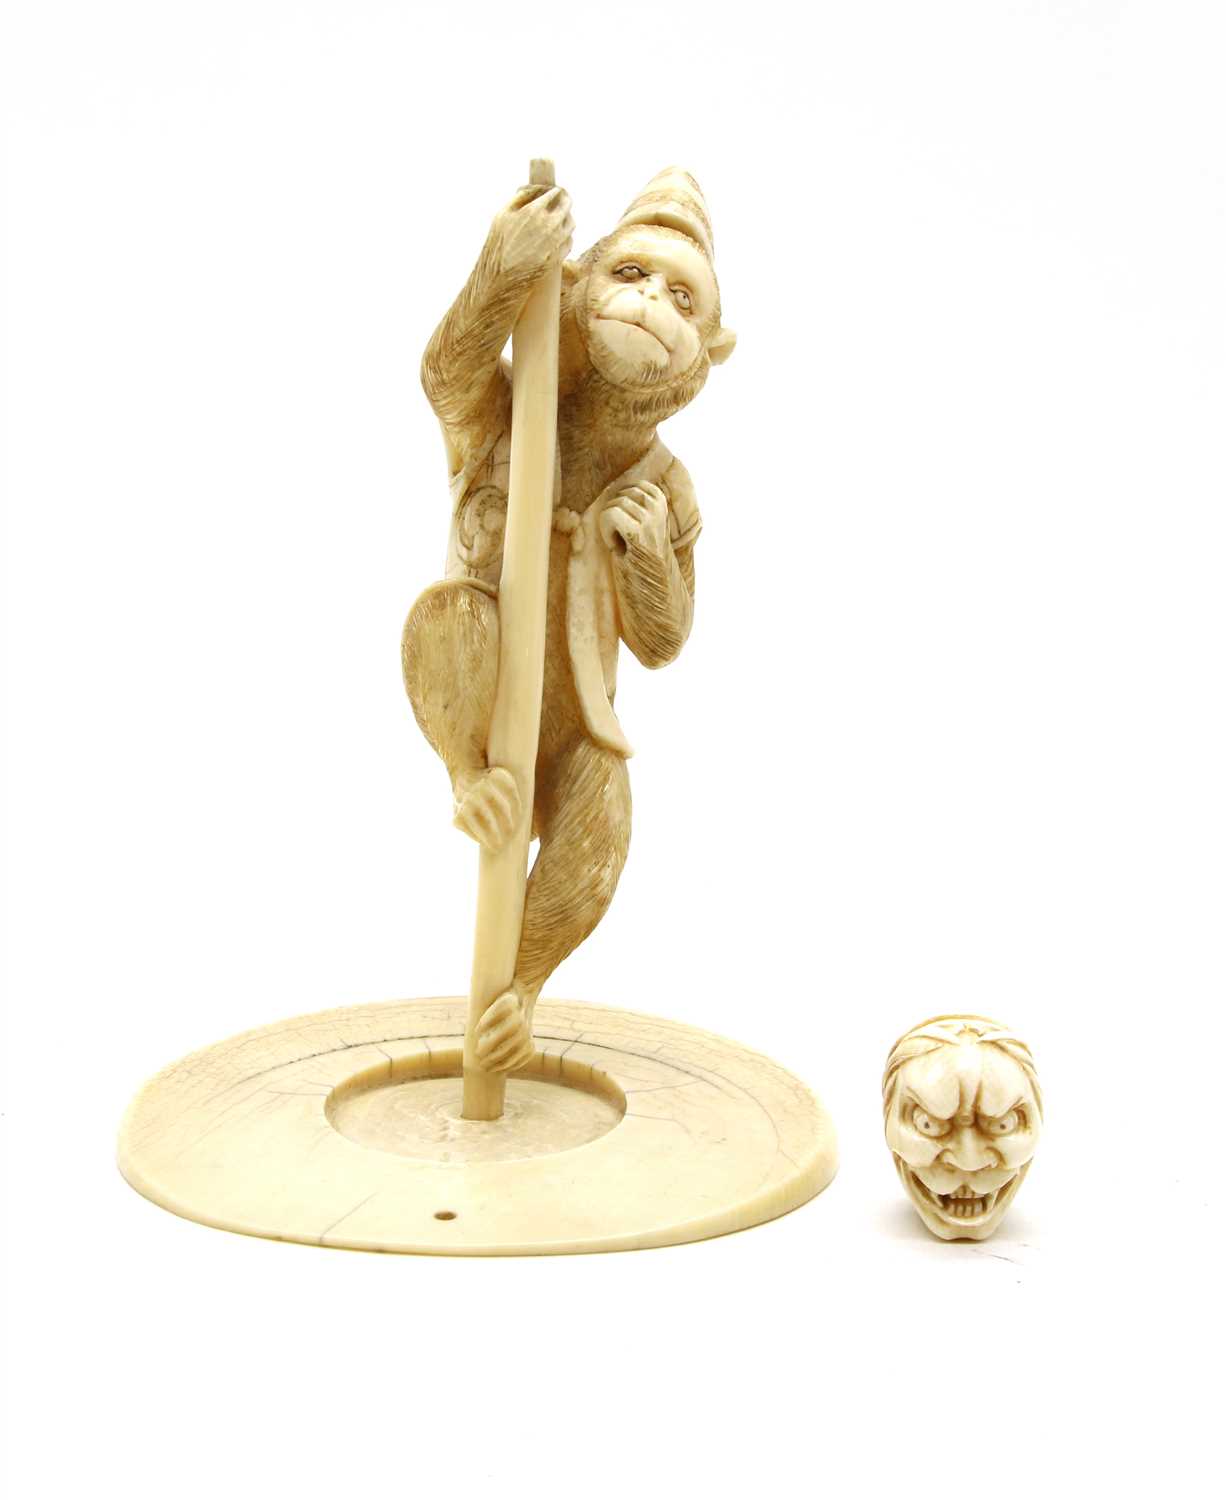 Lot 164 - A Meiji period Japanese carved ivory figure